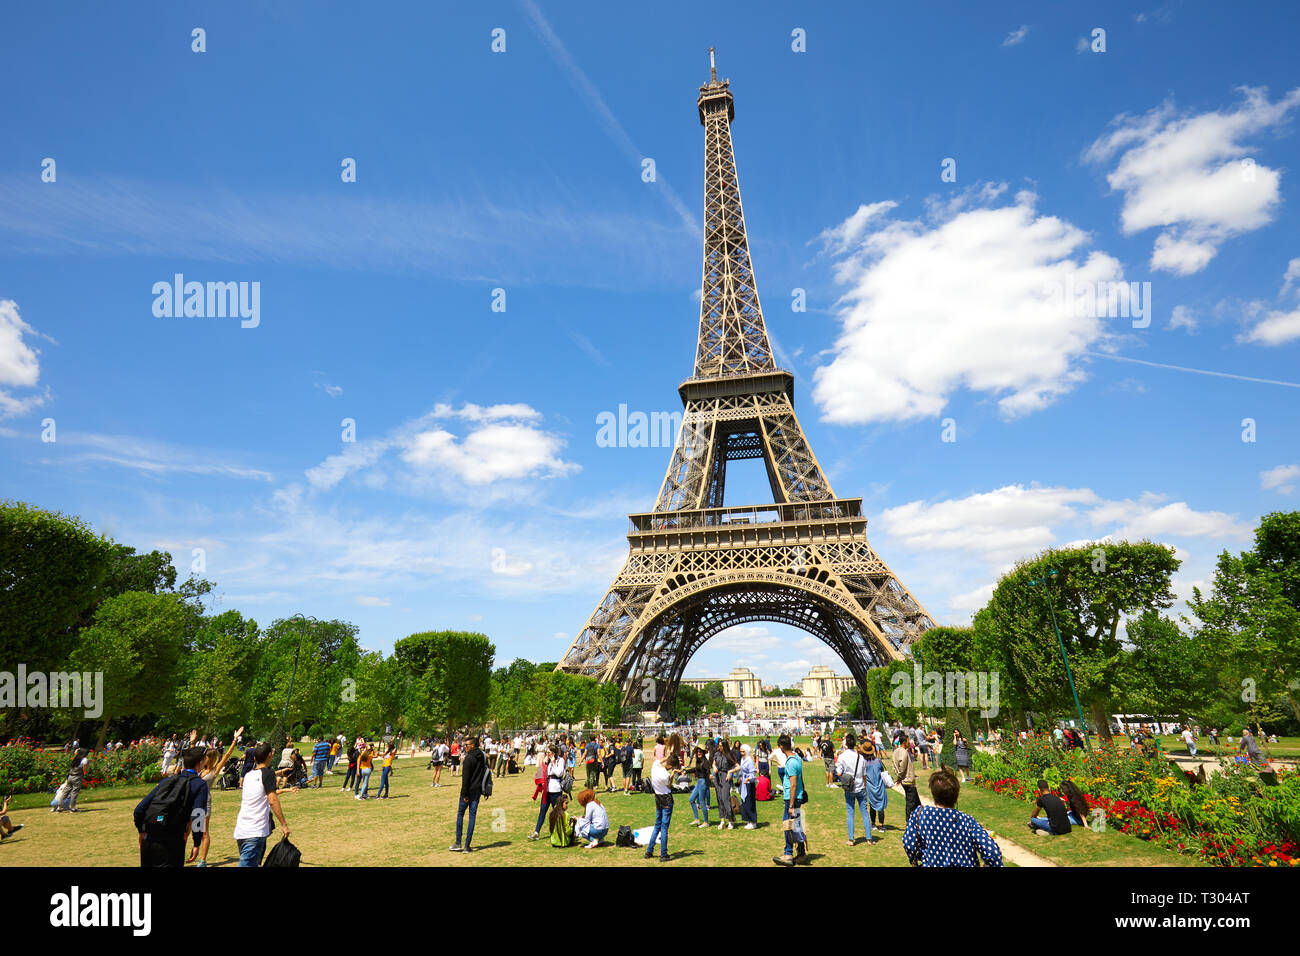 PARIS, FRANCE - JULY 21, 2017: Eiffel Tower in Paris and green field of Mars meadow with people and tourists in a sunny summer day, blue sky Stock Photo